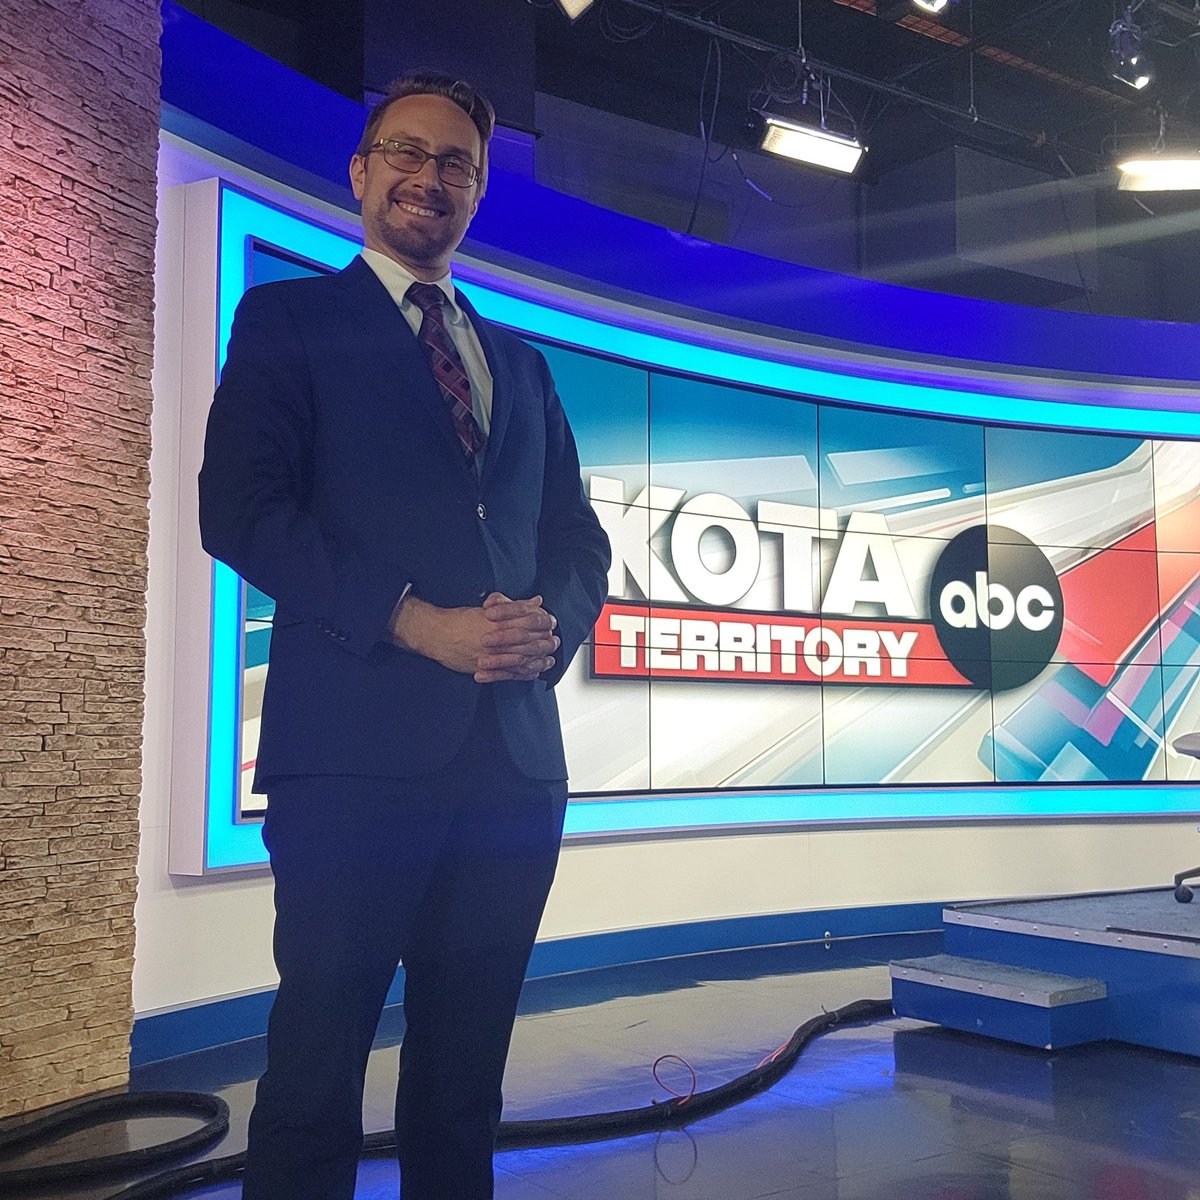 #NewProfilePic, first day at the station edition! #SDwx #BroadcastMeteorology